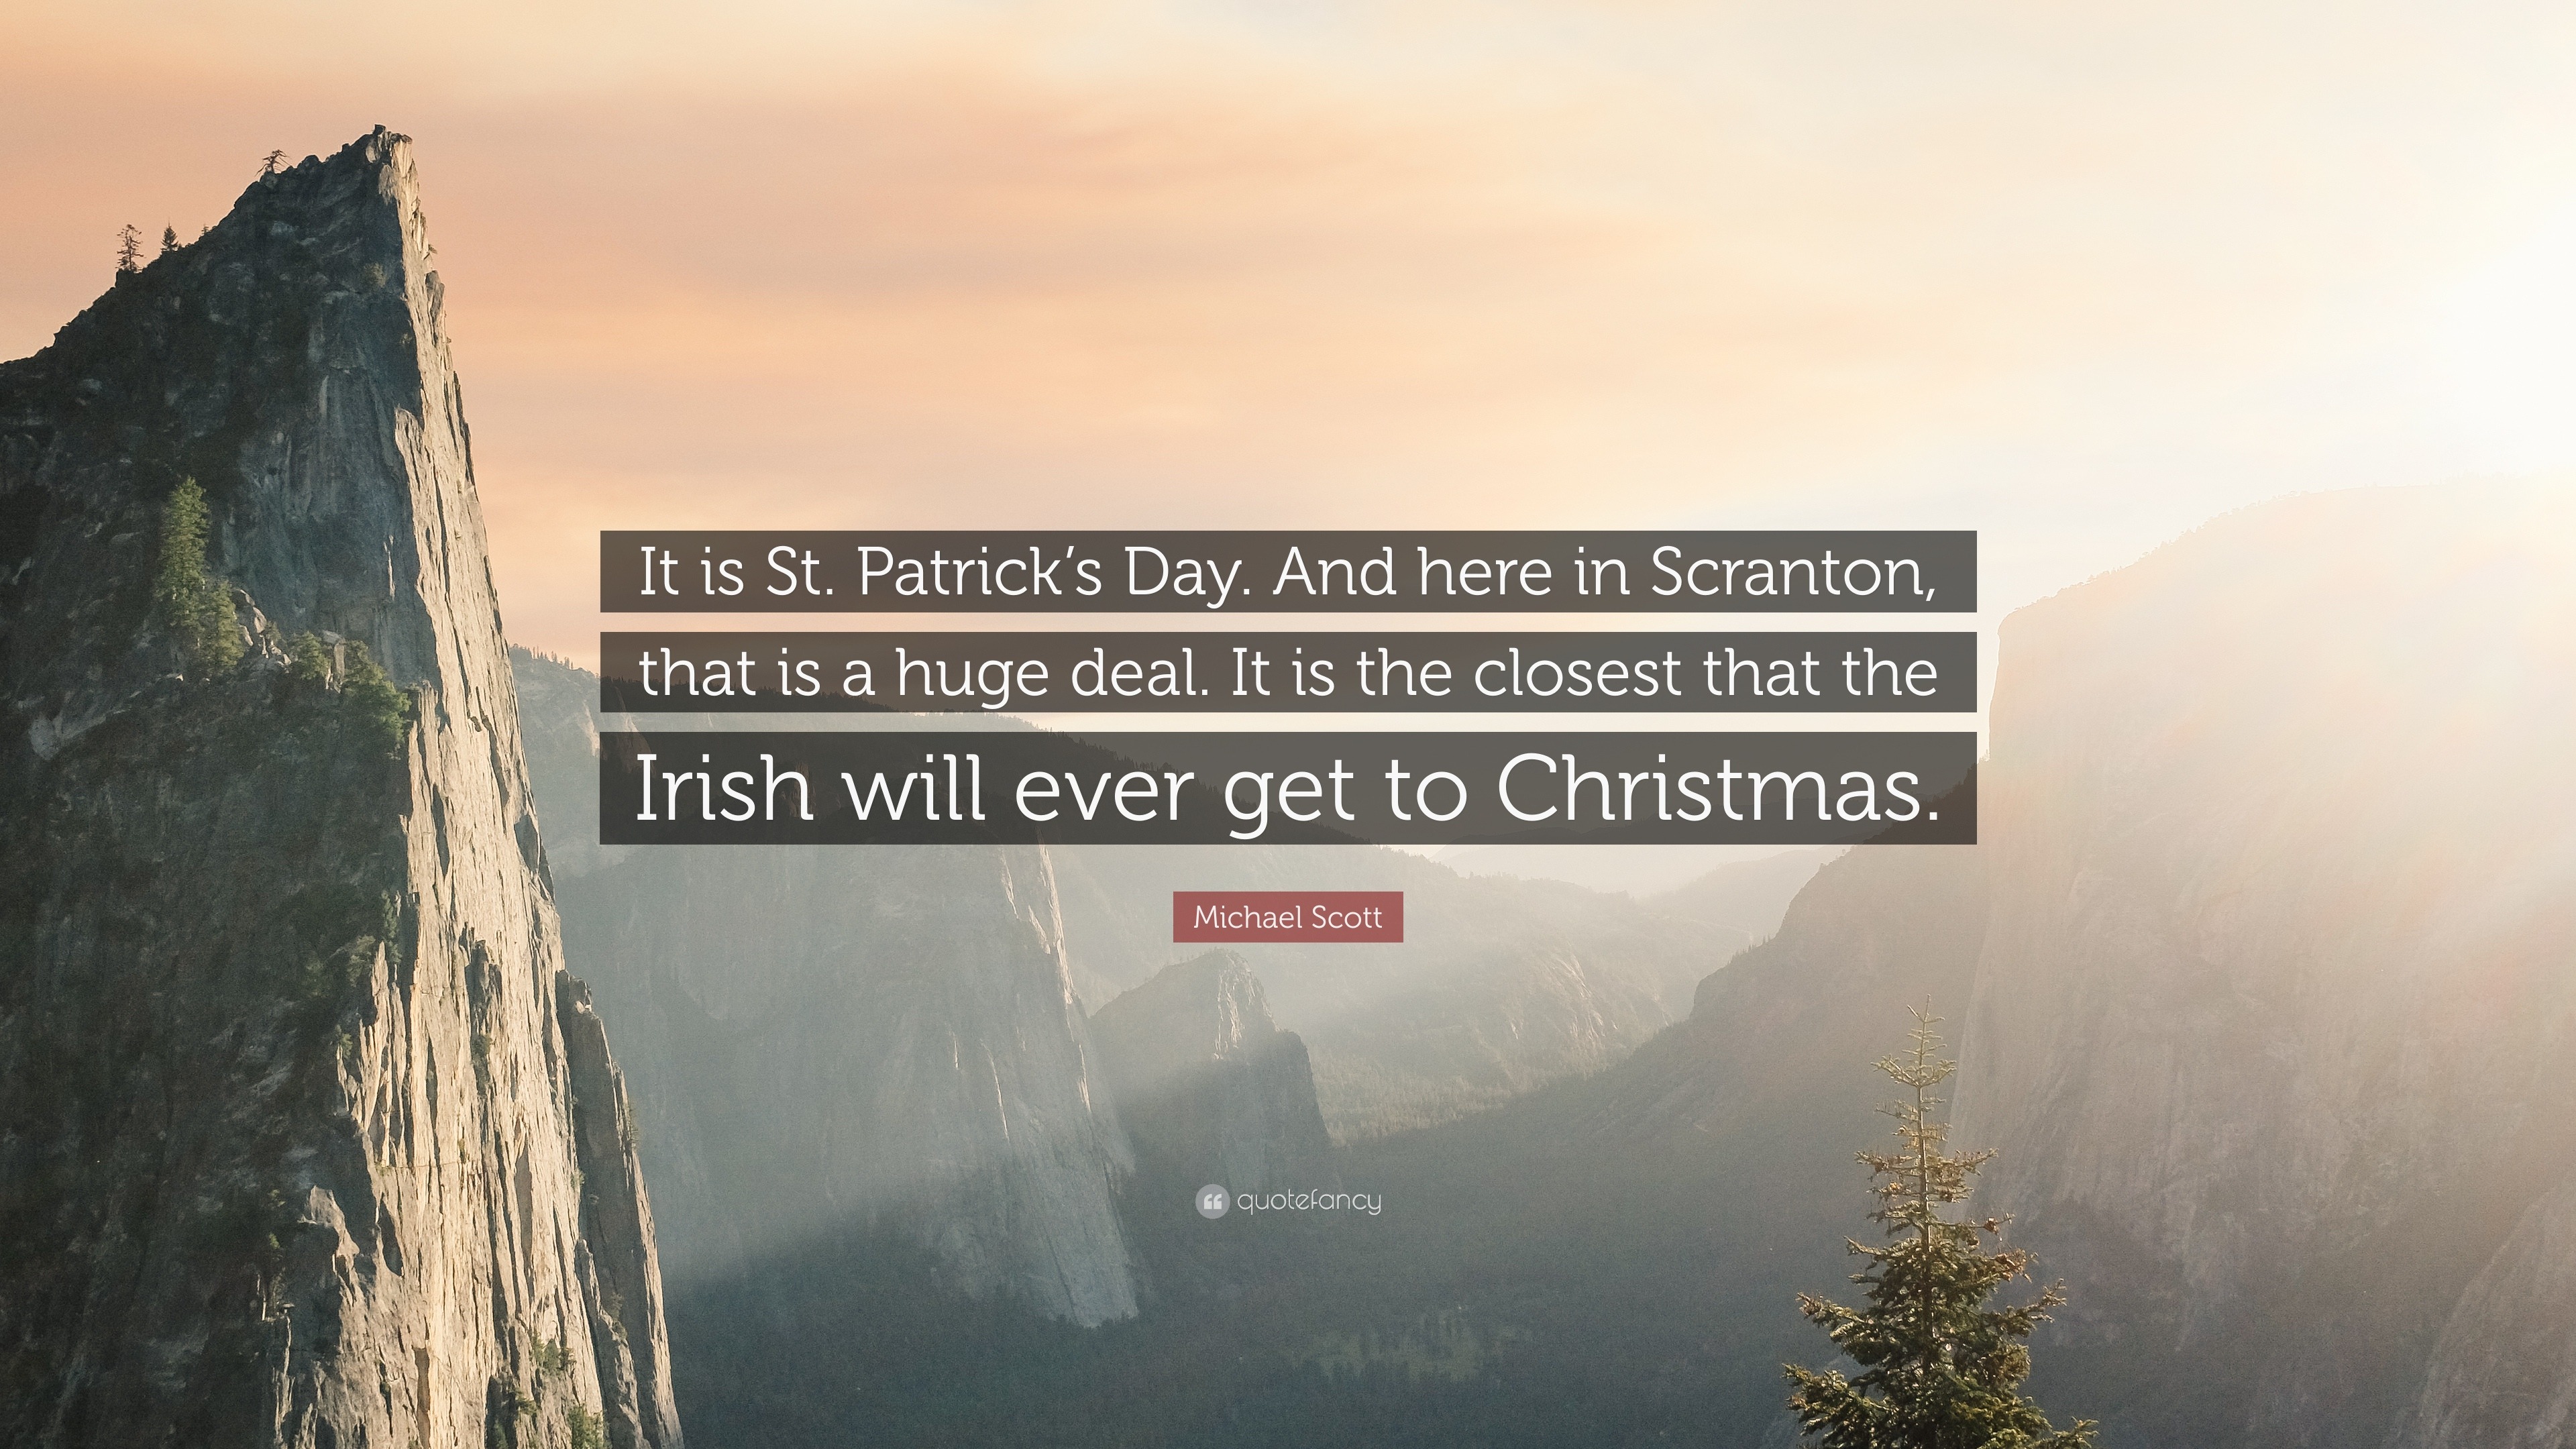 Michael Scott Quote It Is St Patrick S Day And Here In Scranton That Is A Huge Deal It Is The Closest That The Irish Will Ever Get To Ch